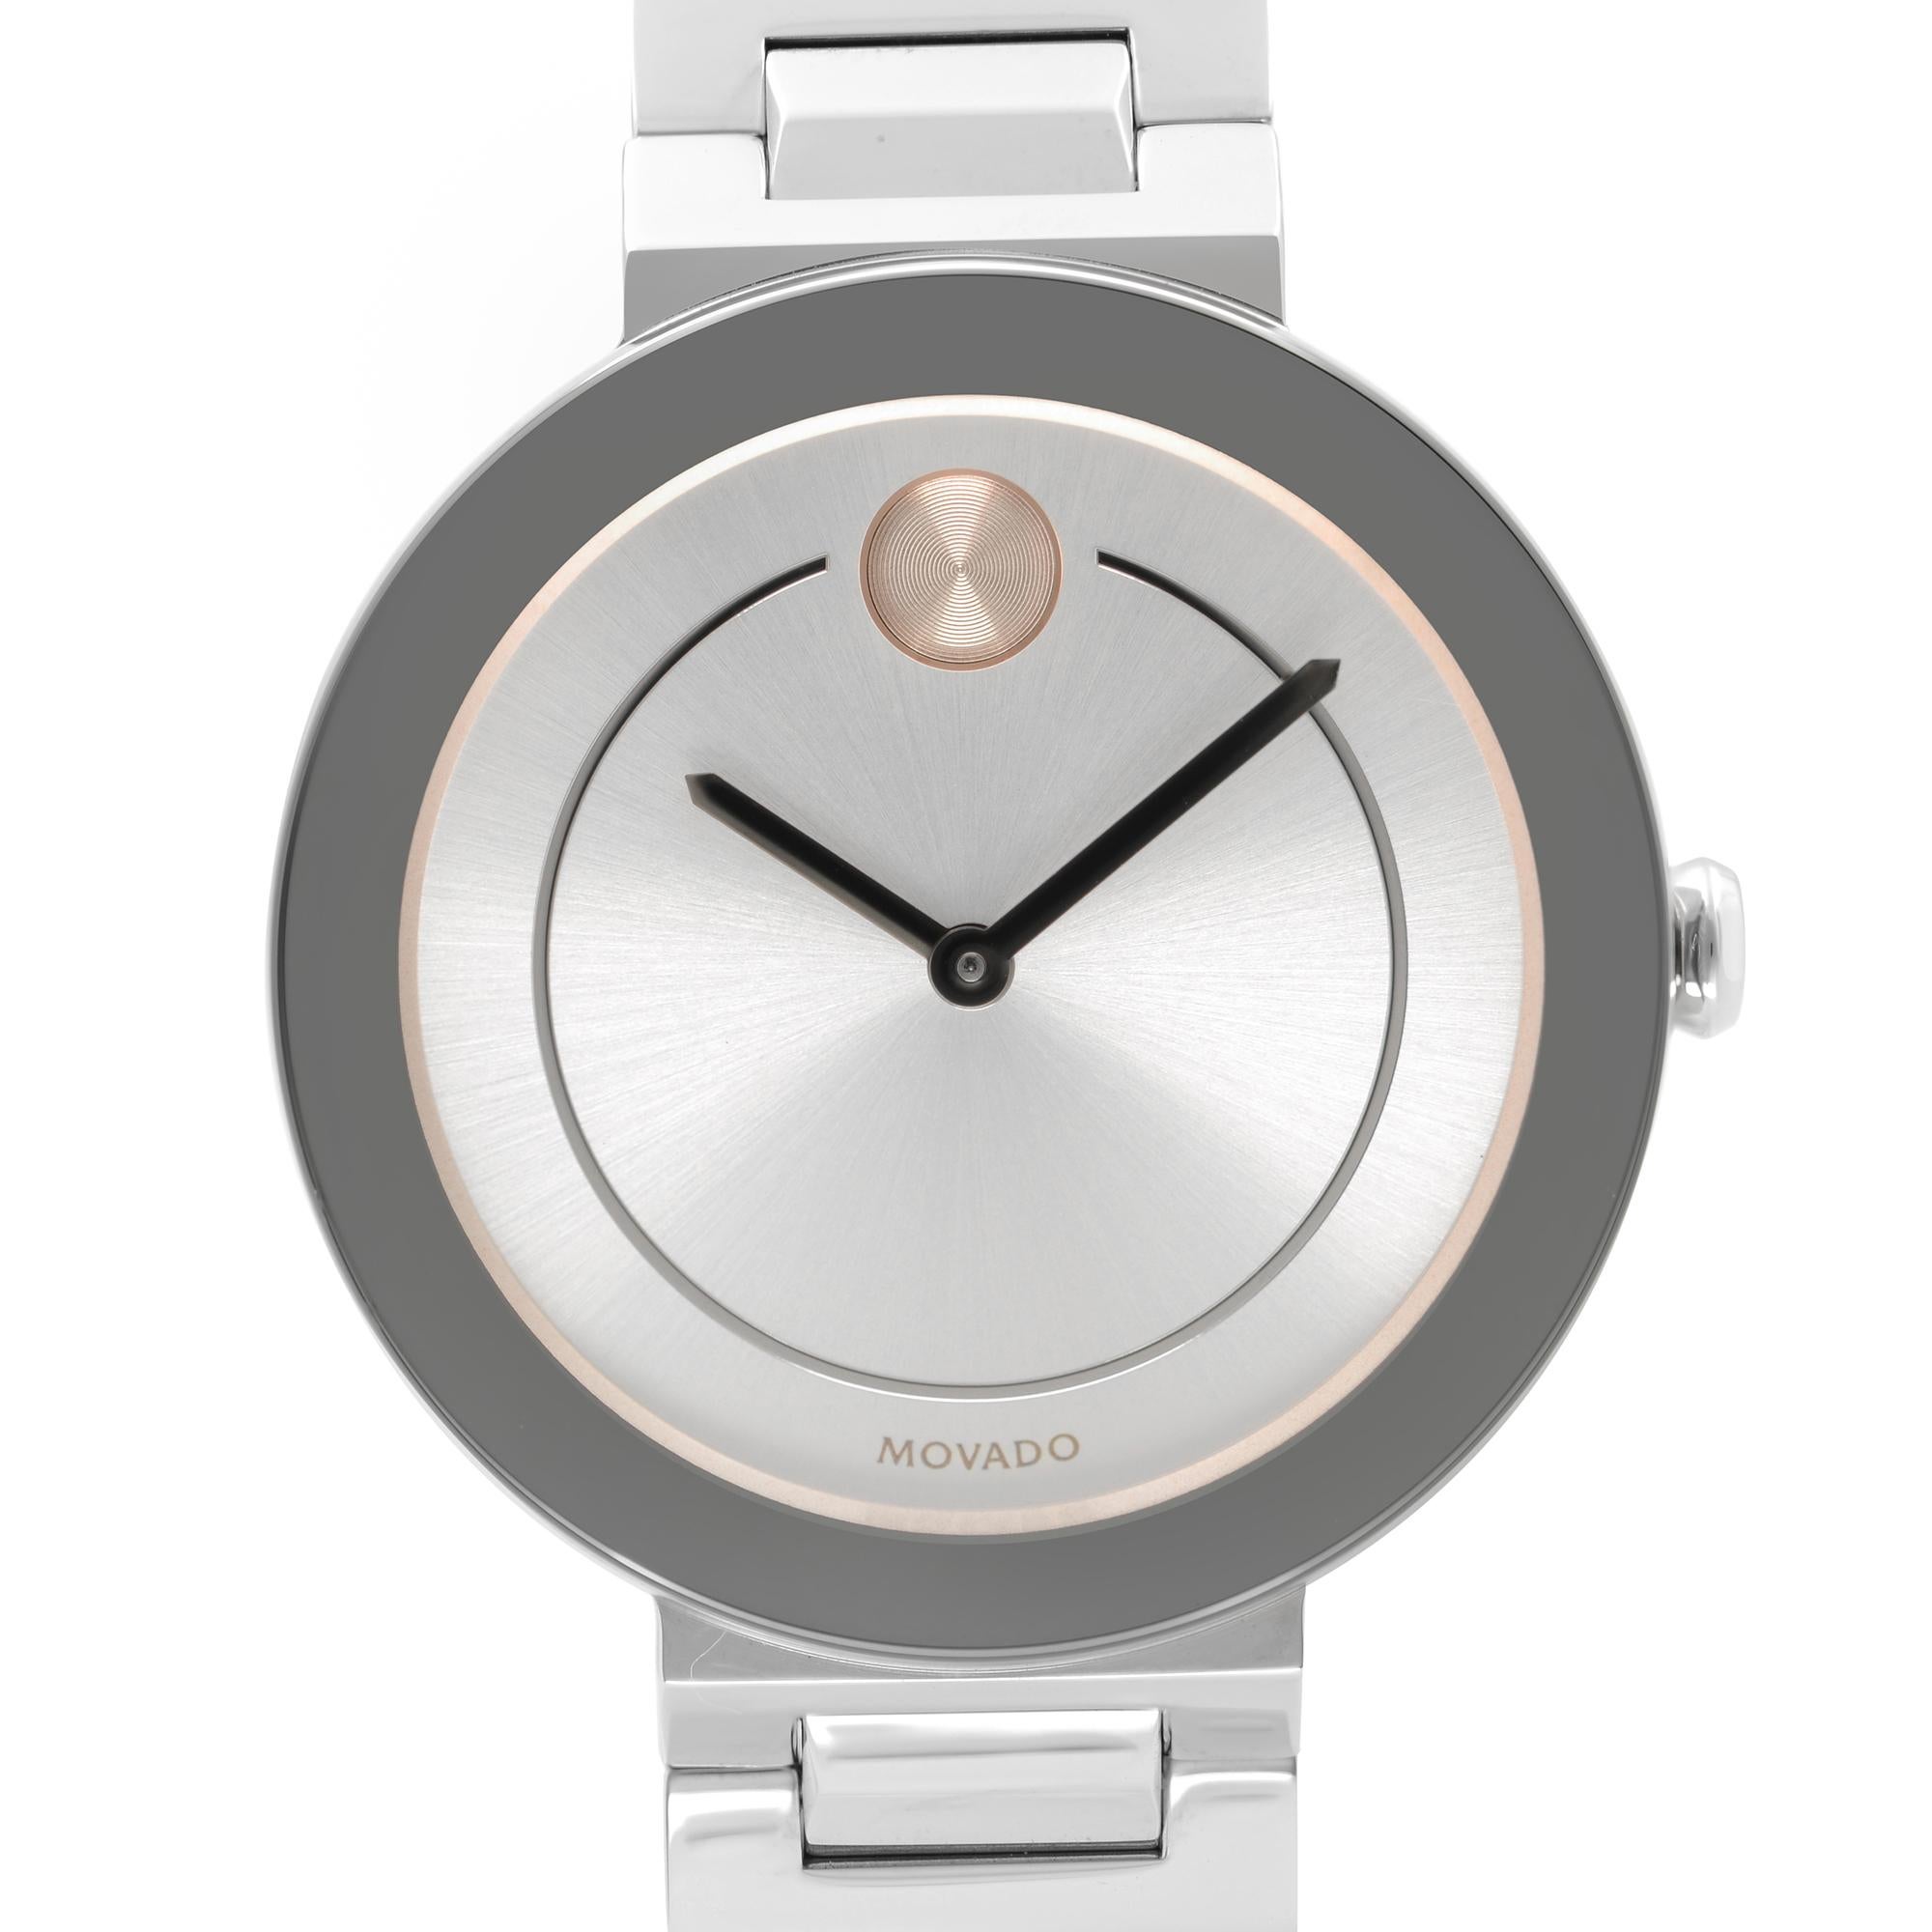 Display Model Movado Bold Stainless Steel Silver Dial Ladies Quartz Watch 3600497. The Watch May have Minor Blemish on the Crystal and Case Back. This Beautiful Timepiece is Powered by Quartz (Battery) Movement And Features: Round Stainless Steel